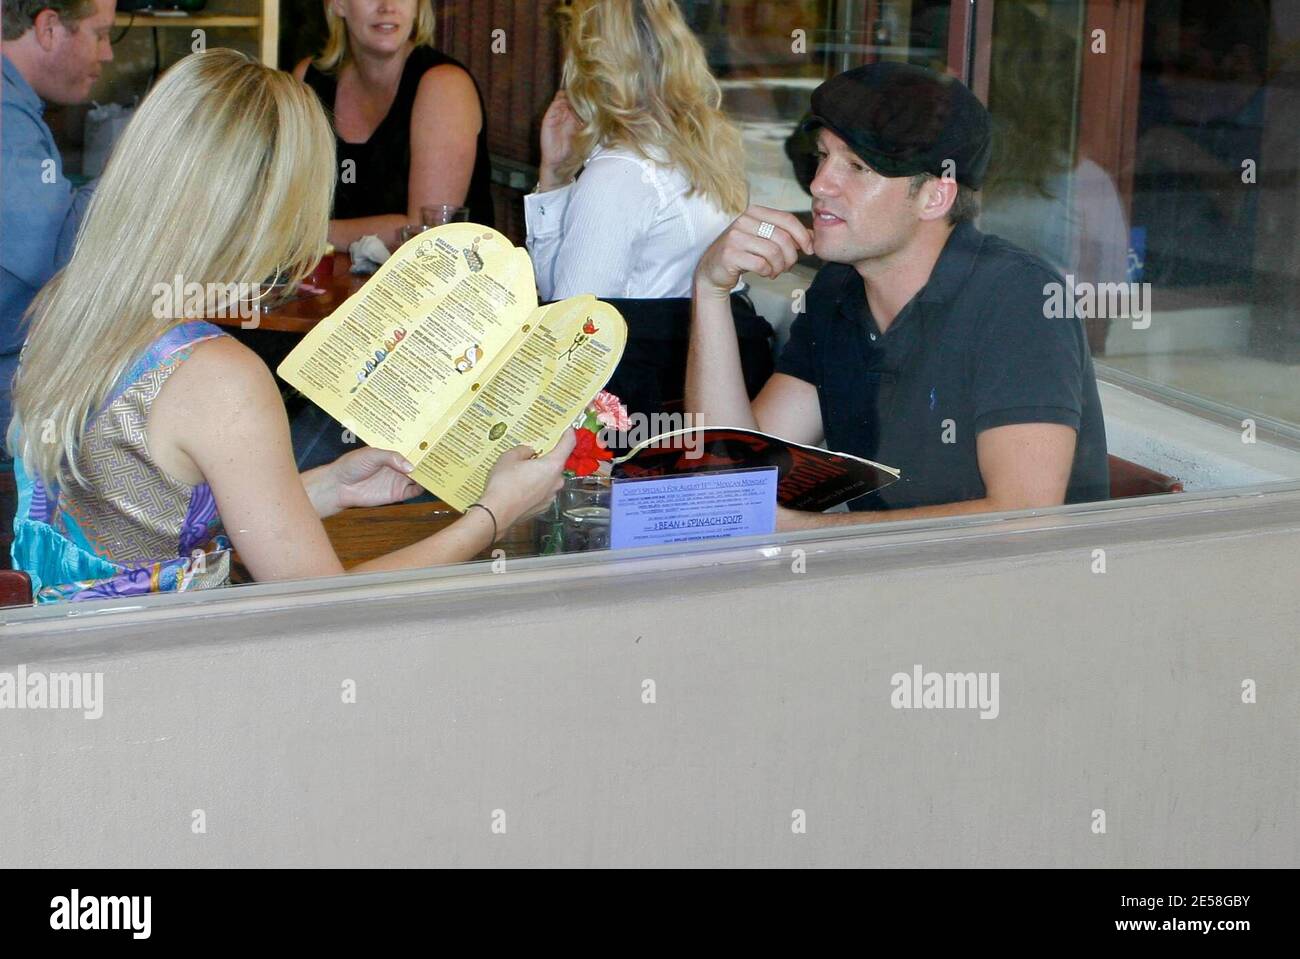 Exclusive!! Actor, writer and producer Jason Dottley and hisÊ'Sordid Lives: The Series' co-star Katherine Bailess shop at Kitson on Robertson Blvd. before heading into the Newsroom Caf for a spot of lunch. The one-time couple remain the best of friends even though Dottley has 'come out of the closet' andÊ gone public about being gay.ÊHe will be starring as Ty in 'Sordid Lives' with Olivia Newton-John & Delta Burke.ÊActress, musician and dancer Katherine has appeared in 'From Justin to Kelly,' 'One Tree Hill' and 'Gilmore Girls.' Los Angeles, CA 8/13/07.   [[laj]] Stock Photo